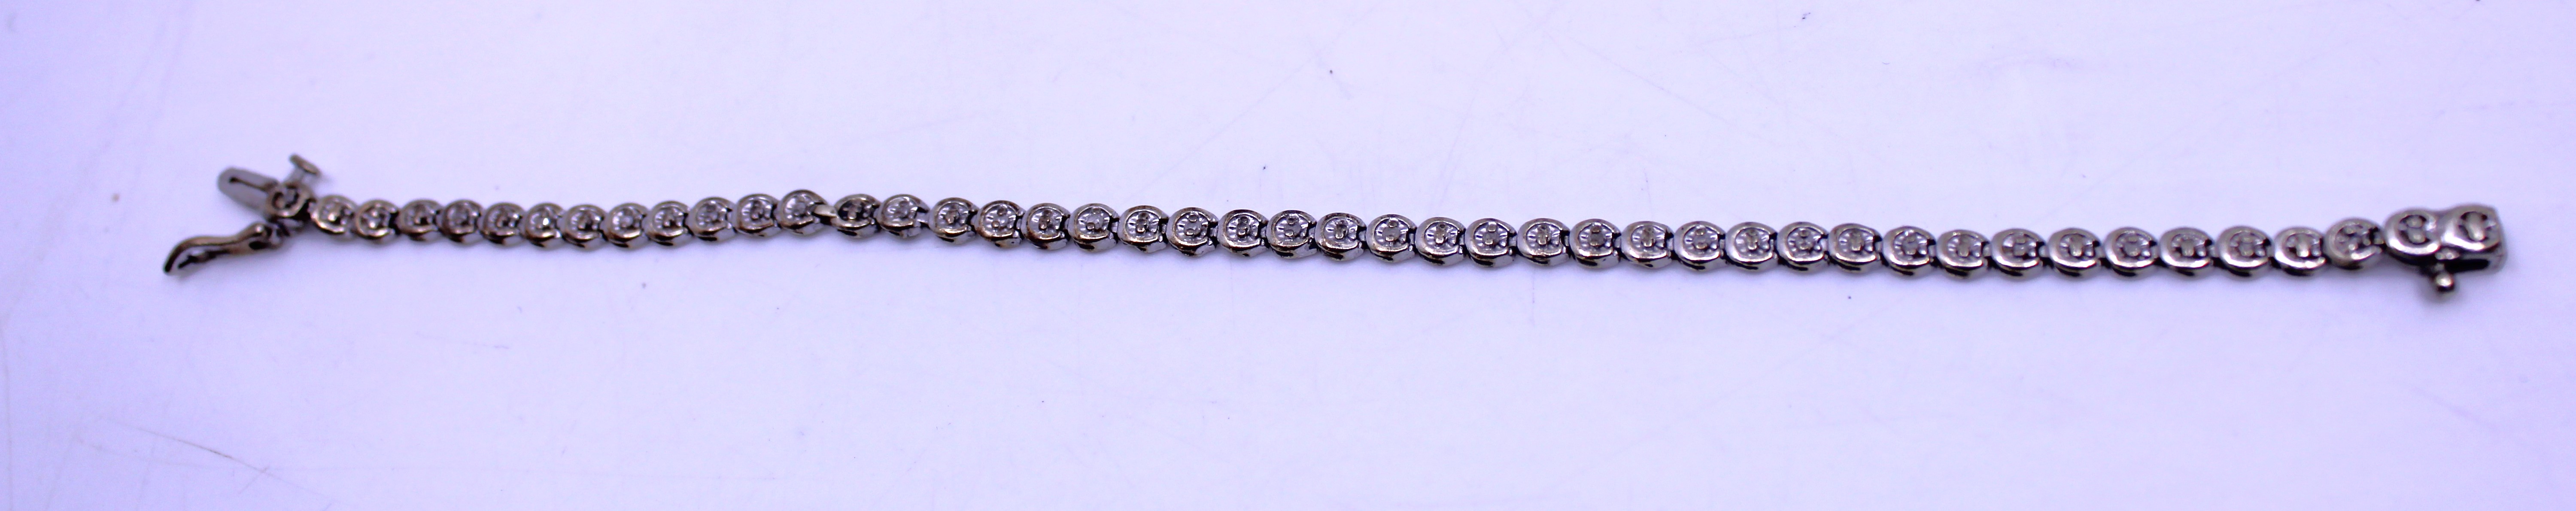 9ct White Gold 0.25ct total Diamond Bracelet.  The bracelet is hallmarked "375" for 9ct Gold and "